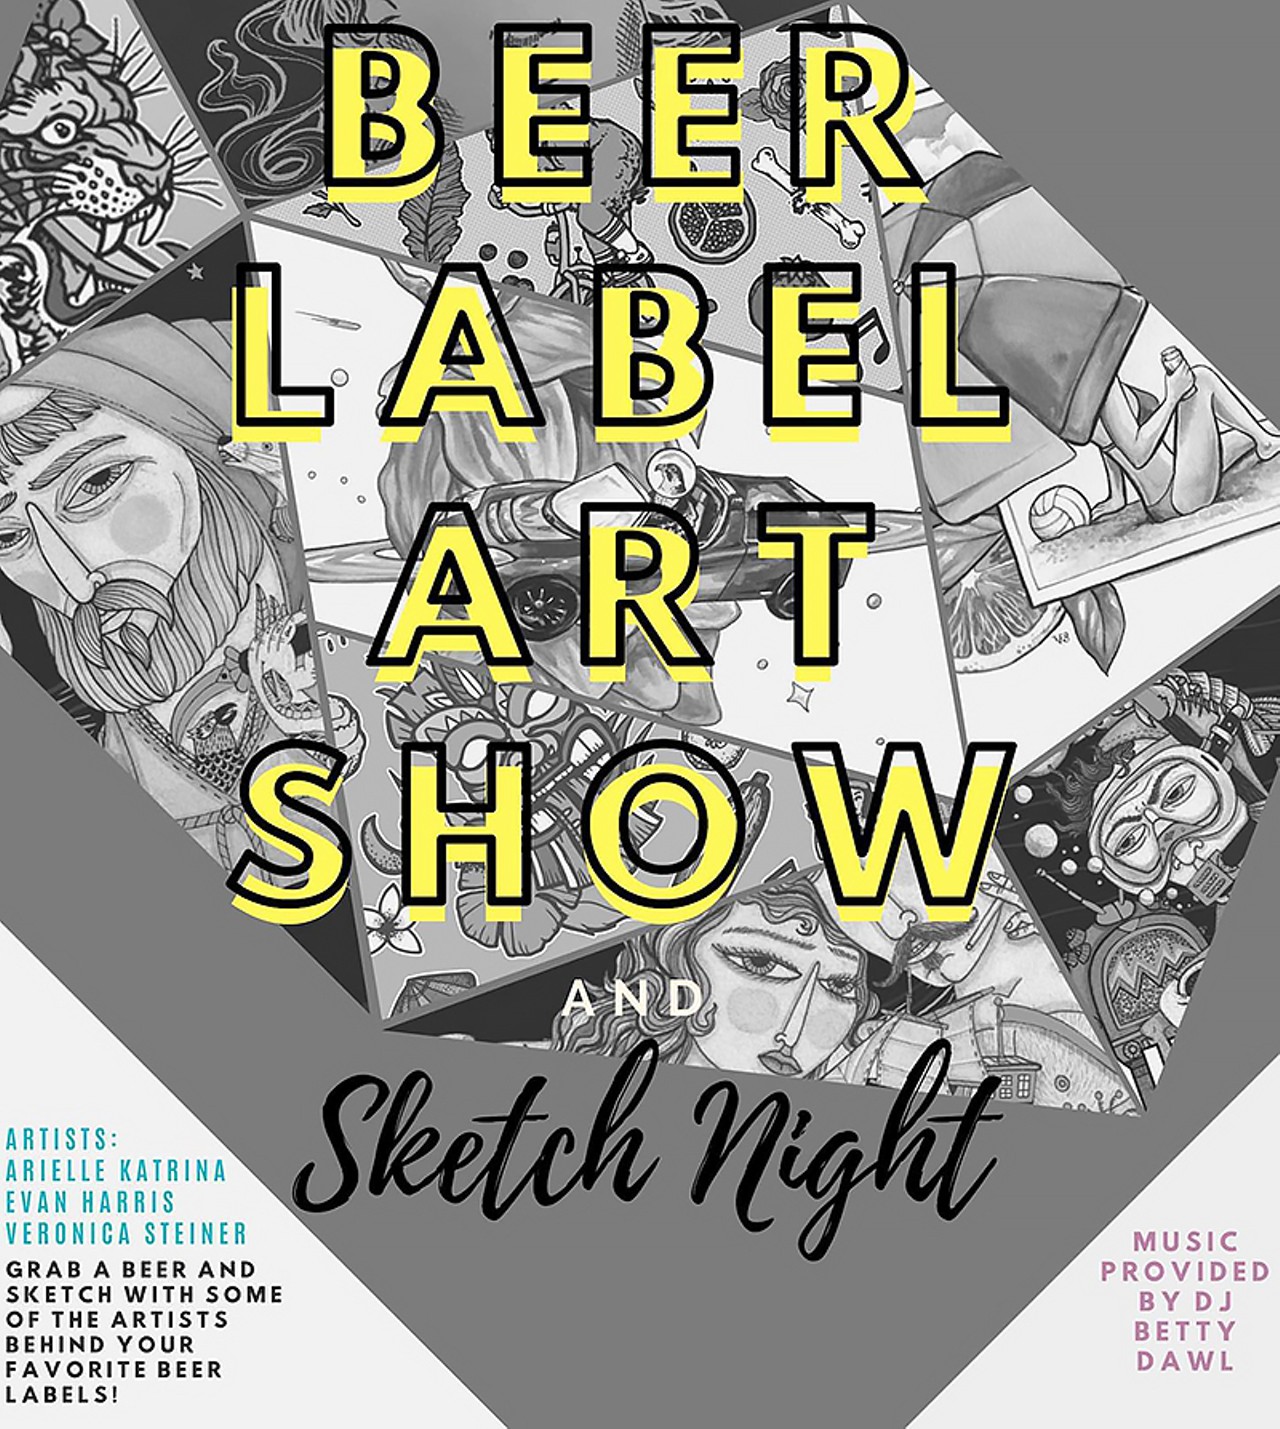 Beer Label Art Show at Independent Bar and Caf&eacute; in TampaBeer label artists Arielle Katrina, Evan Harris, and Veronica Steiner will be there. Come sketch with them.Fri., Mar. 1, 7-10 p.m.
Photo via the Facebook event page